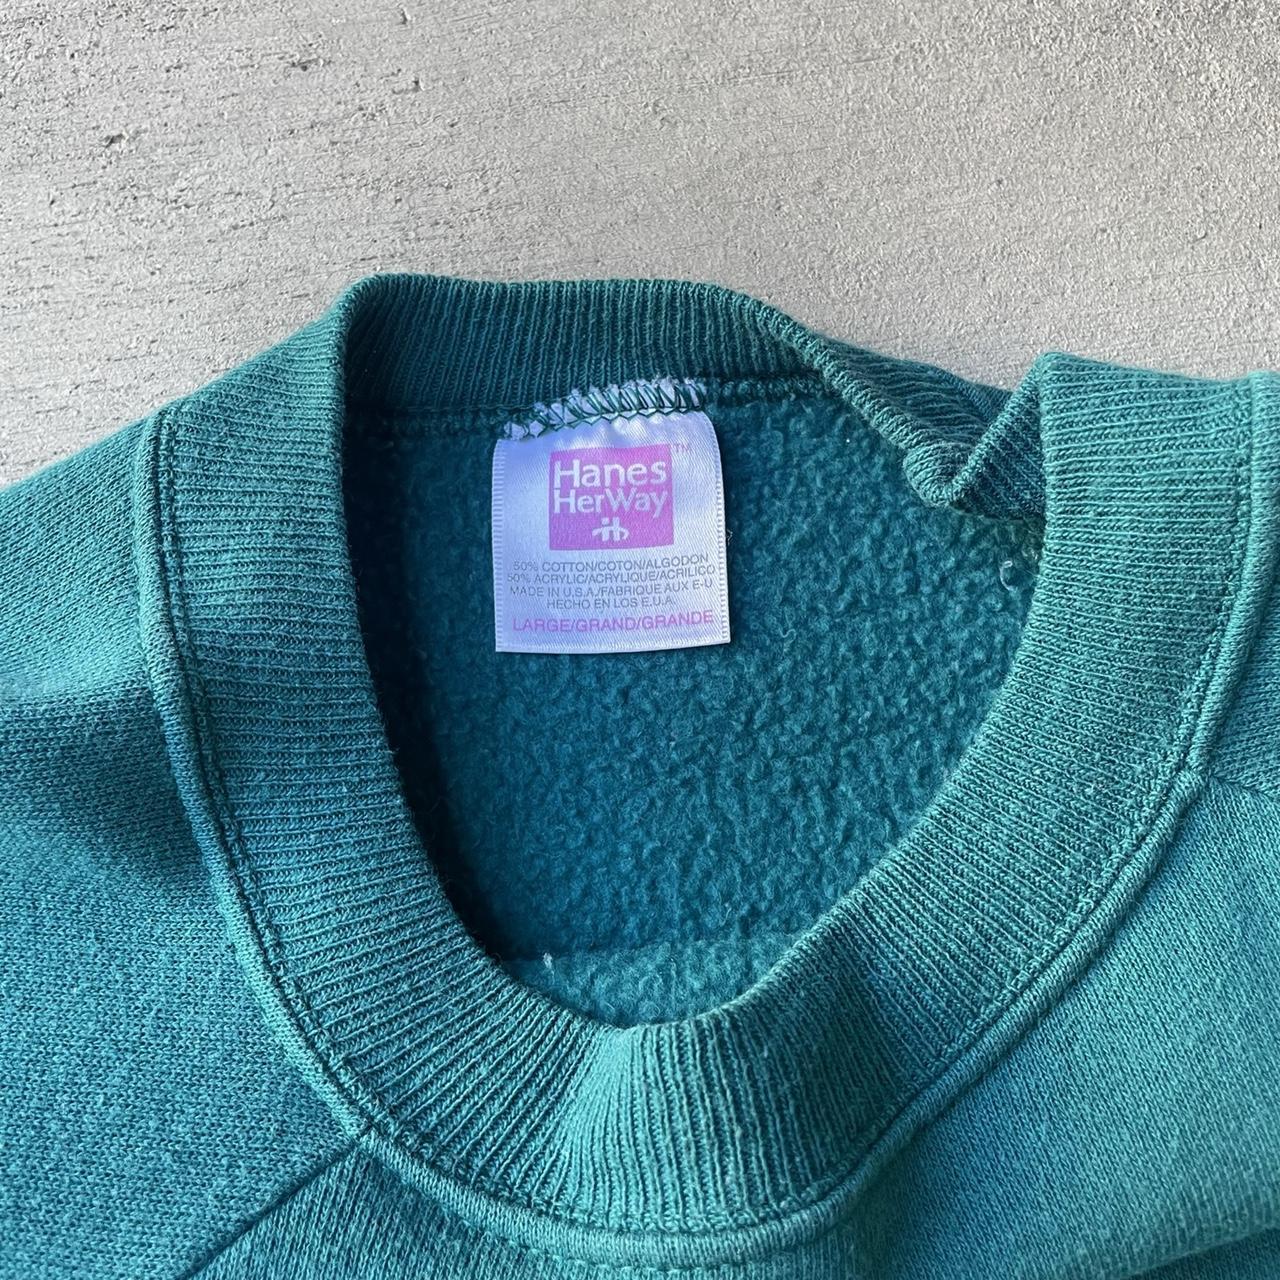 VINTAGE TURQUOISE HANES HER WAY SWEAT SHIRT MADE IN... - Depop